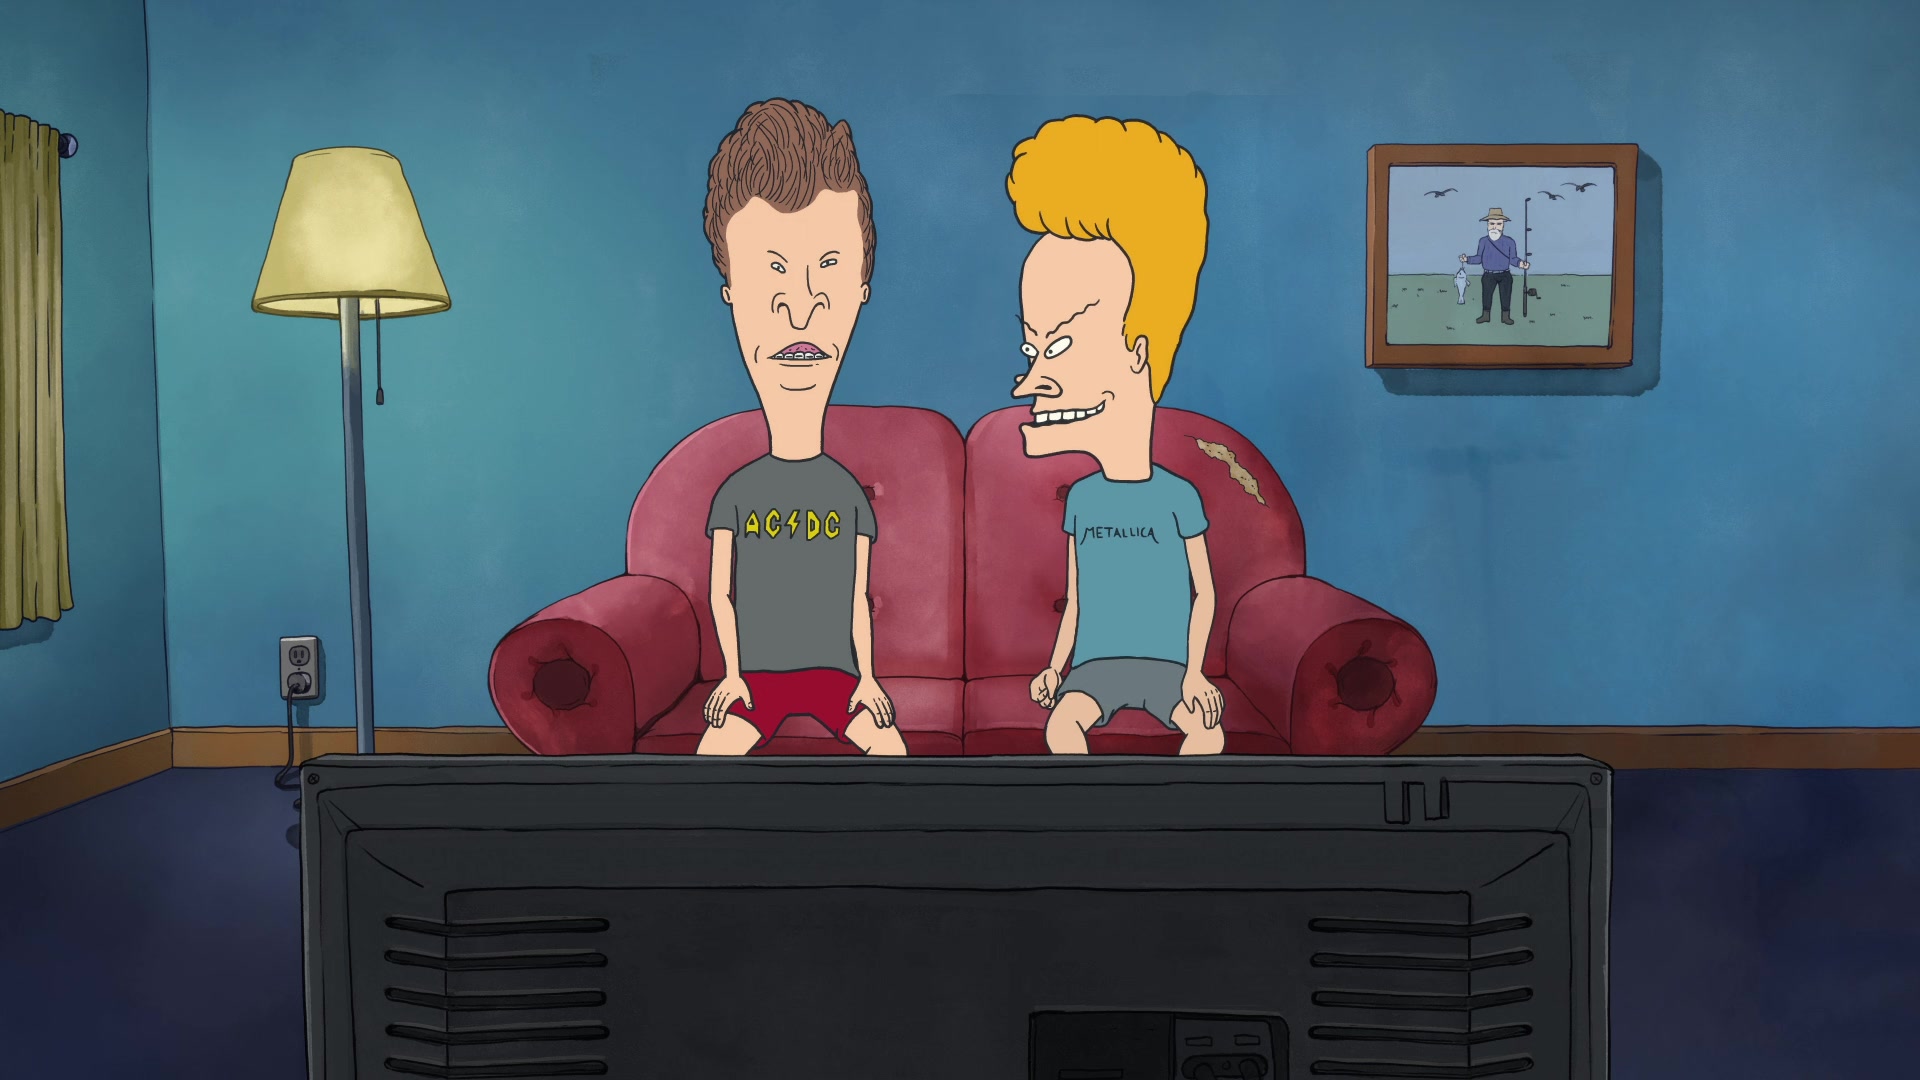 download beavis and butthead series 2022